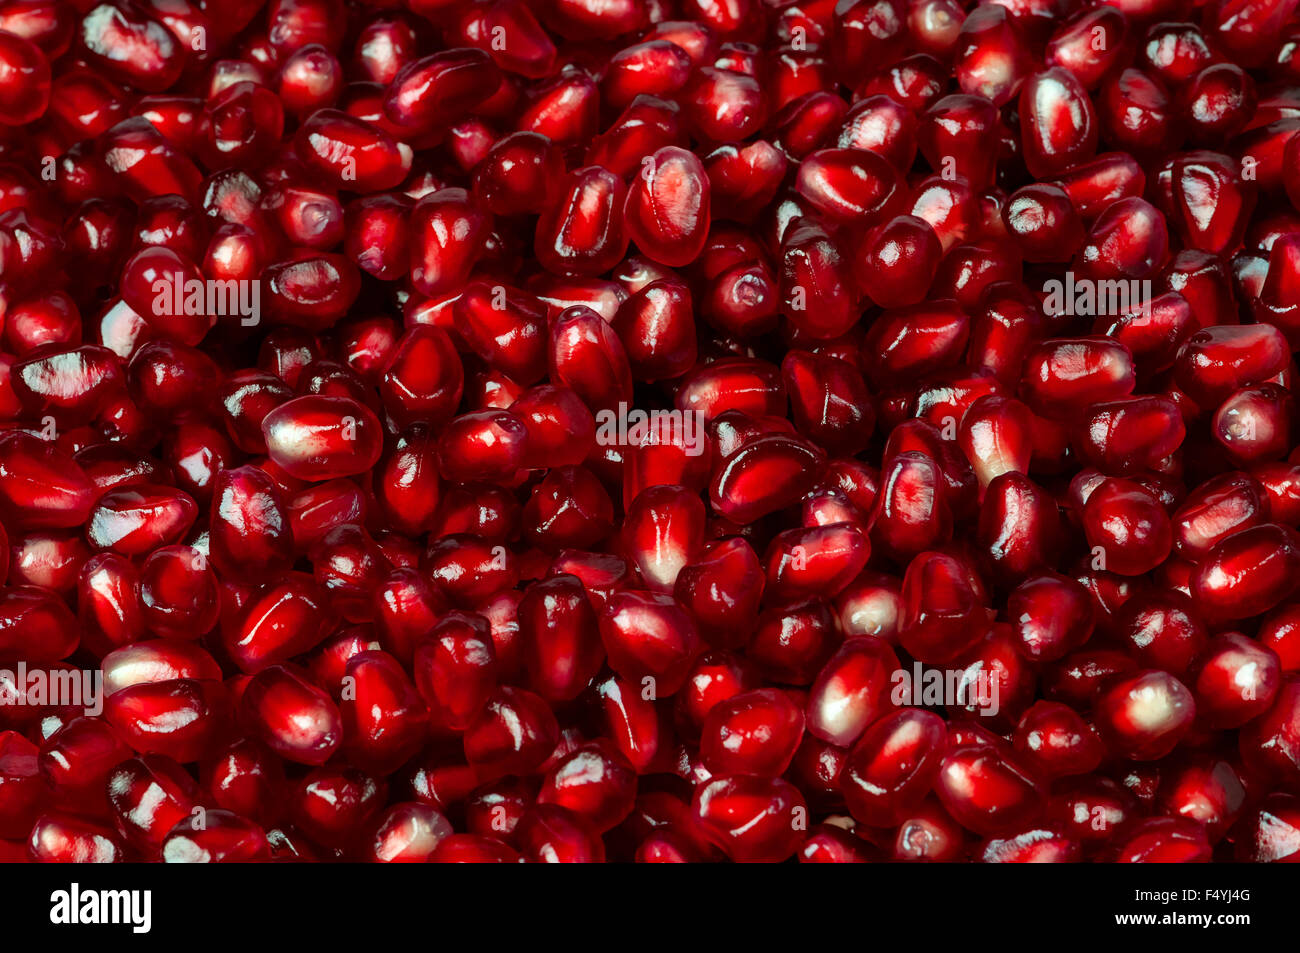 Delicious red ripe juicy pomegranate seed background texture Stock Photo